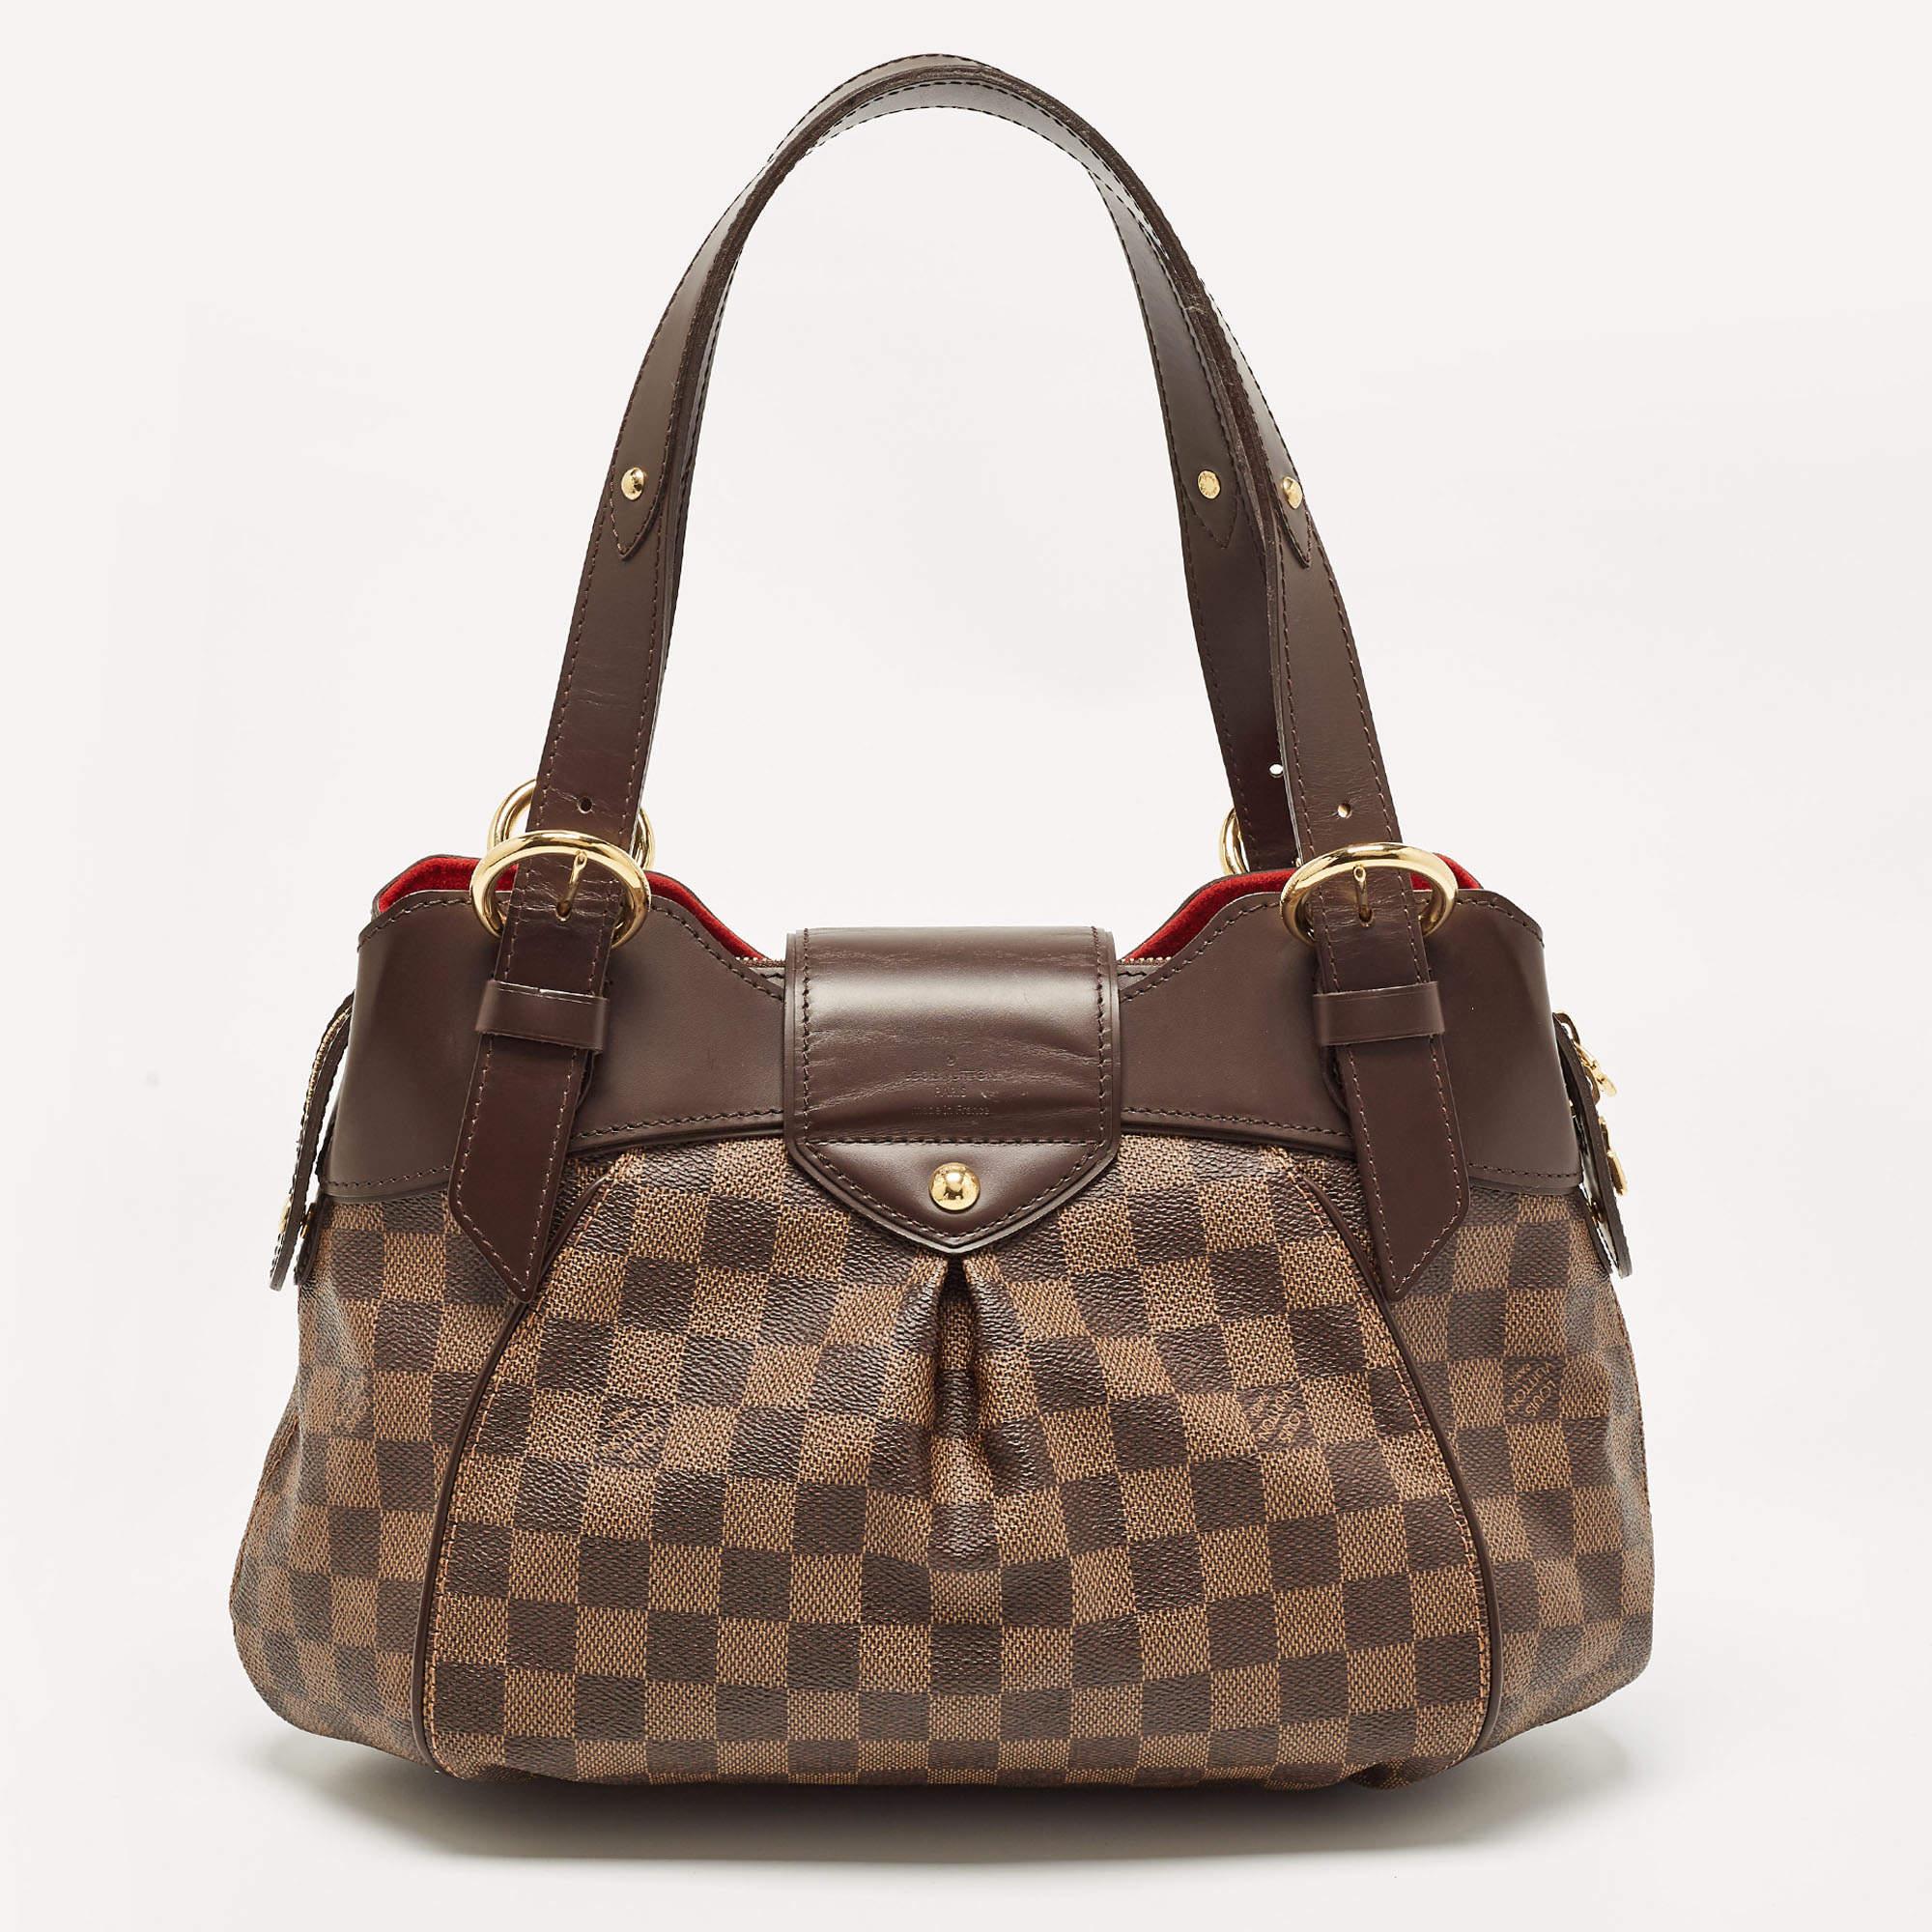 Louis Vuitton's handbags are popular owing to their high style and functionality. This Sistina PM bag, like all the other handbags, is durable and stylish. Crafted from Damier Ebene canvas, the bag can be paraded using the top handles. It is